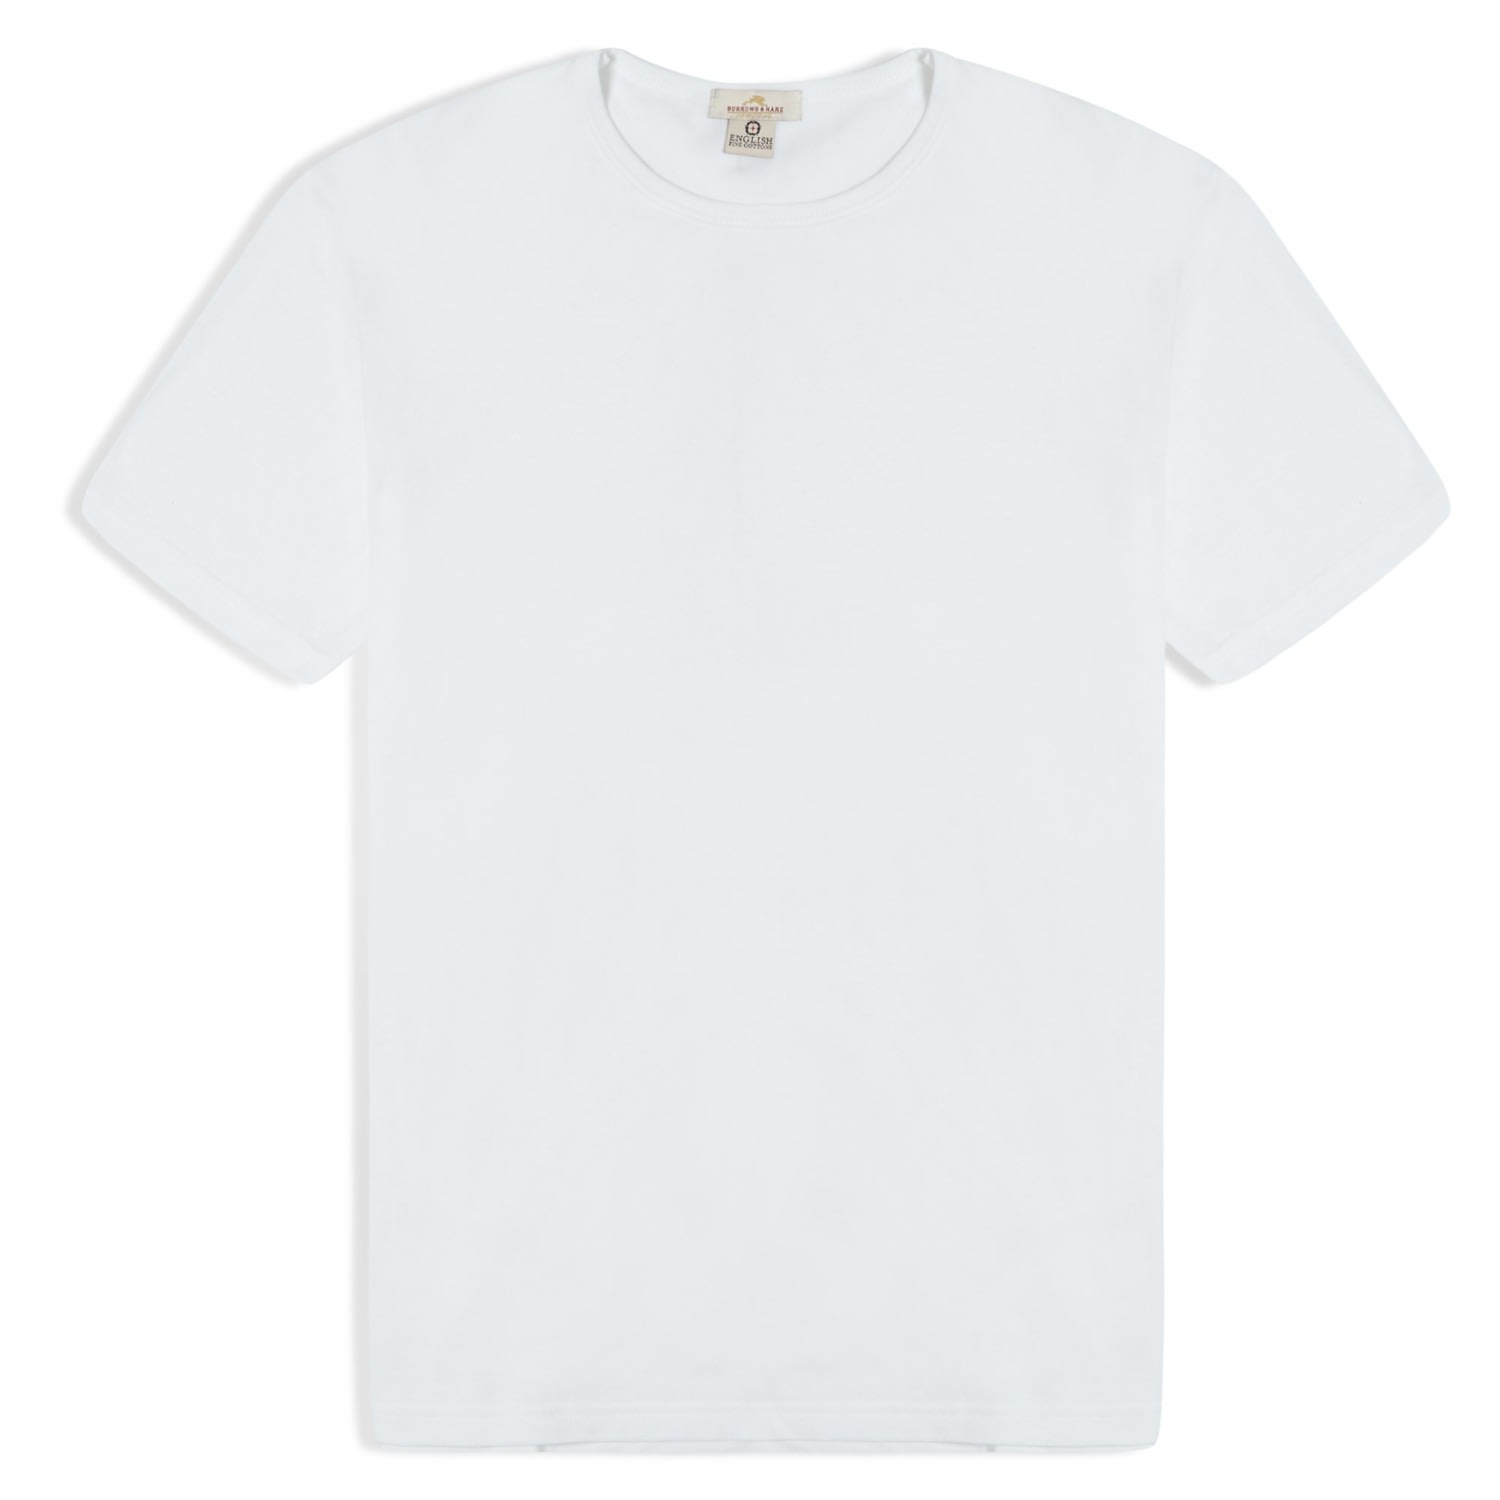 Burrows And Hare Men's T-shirt - White